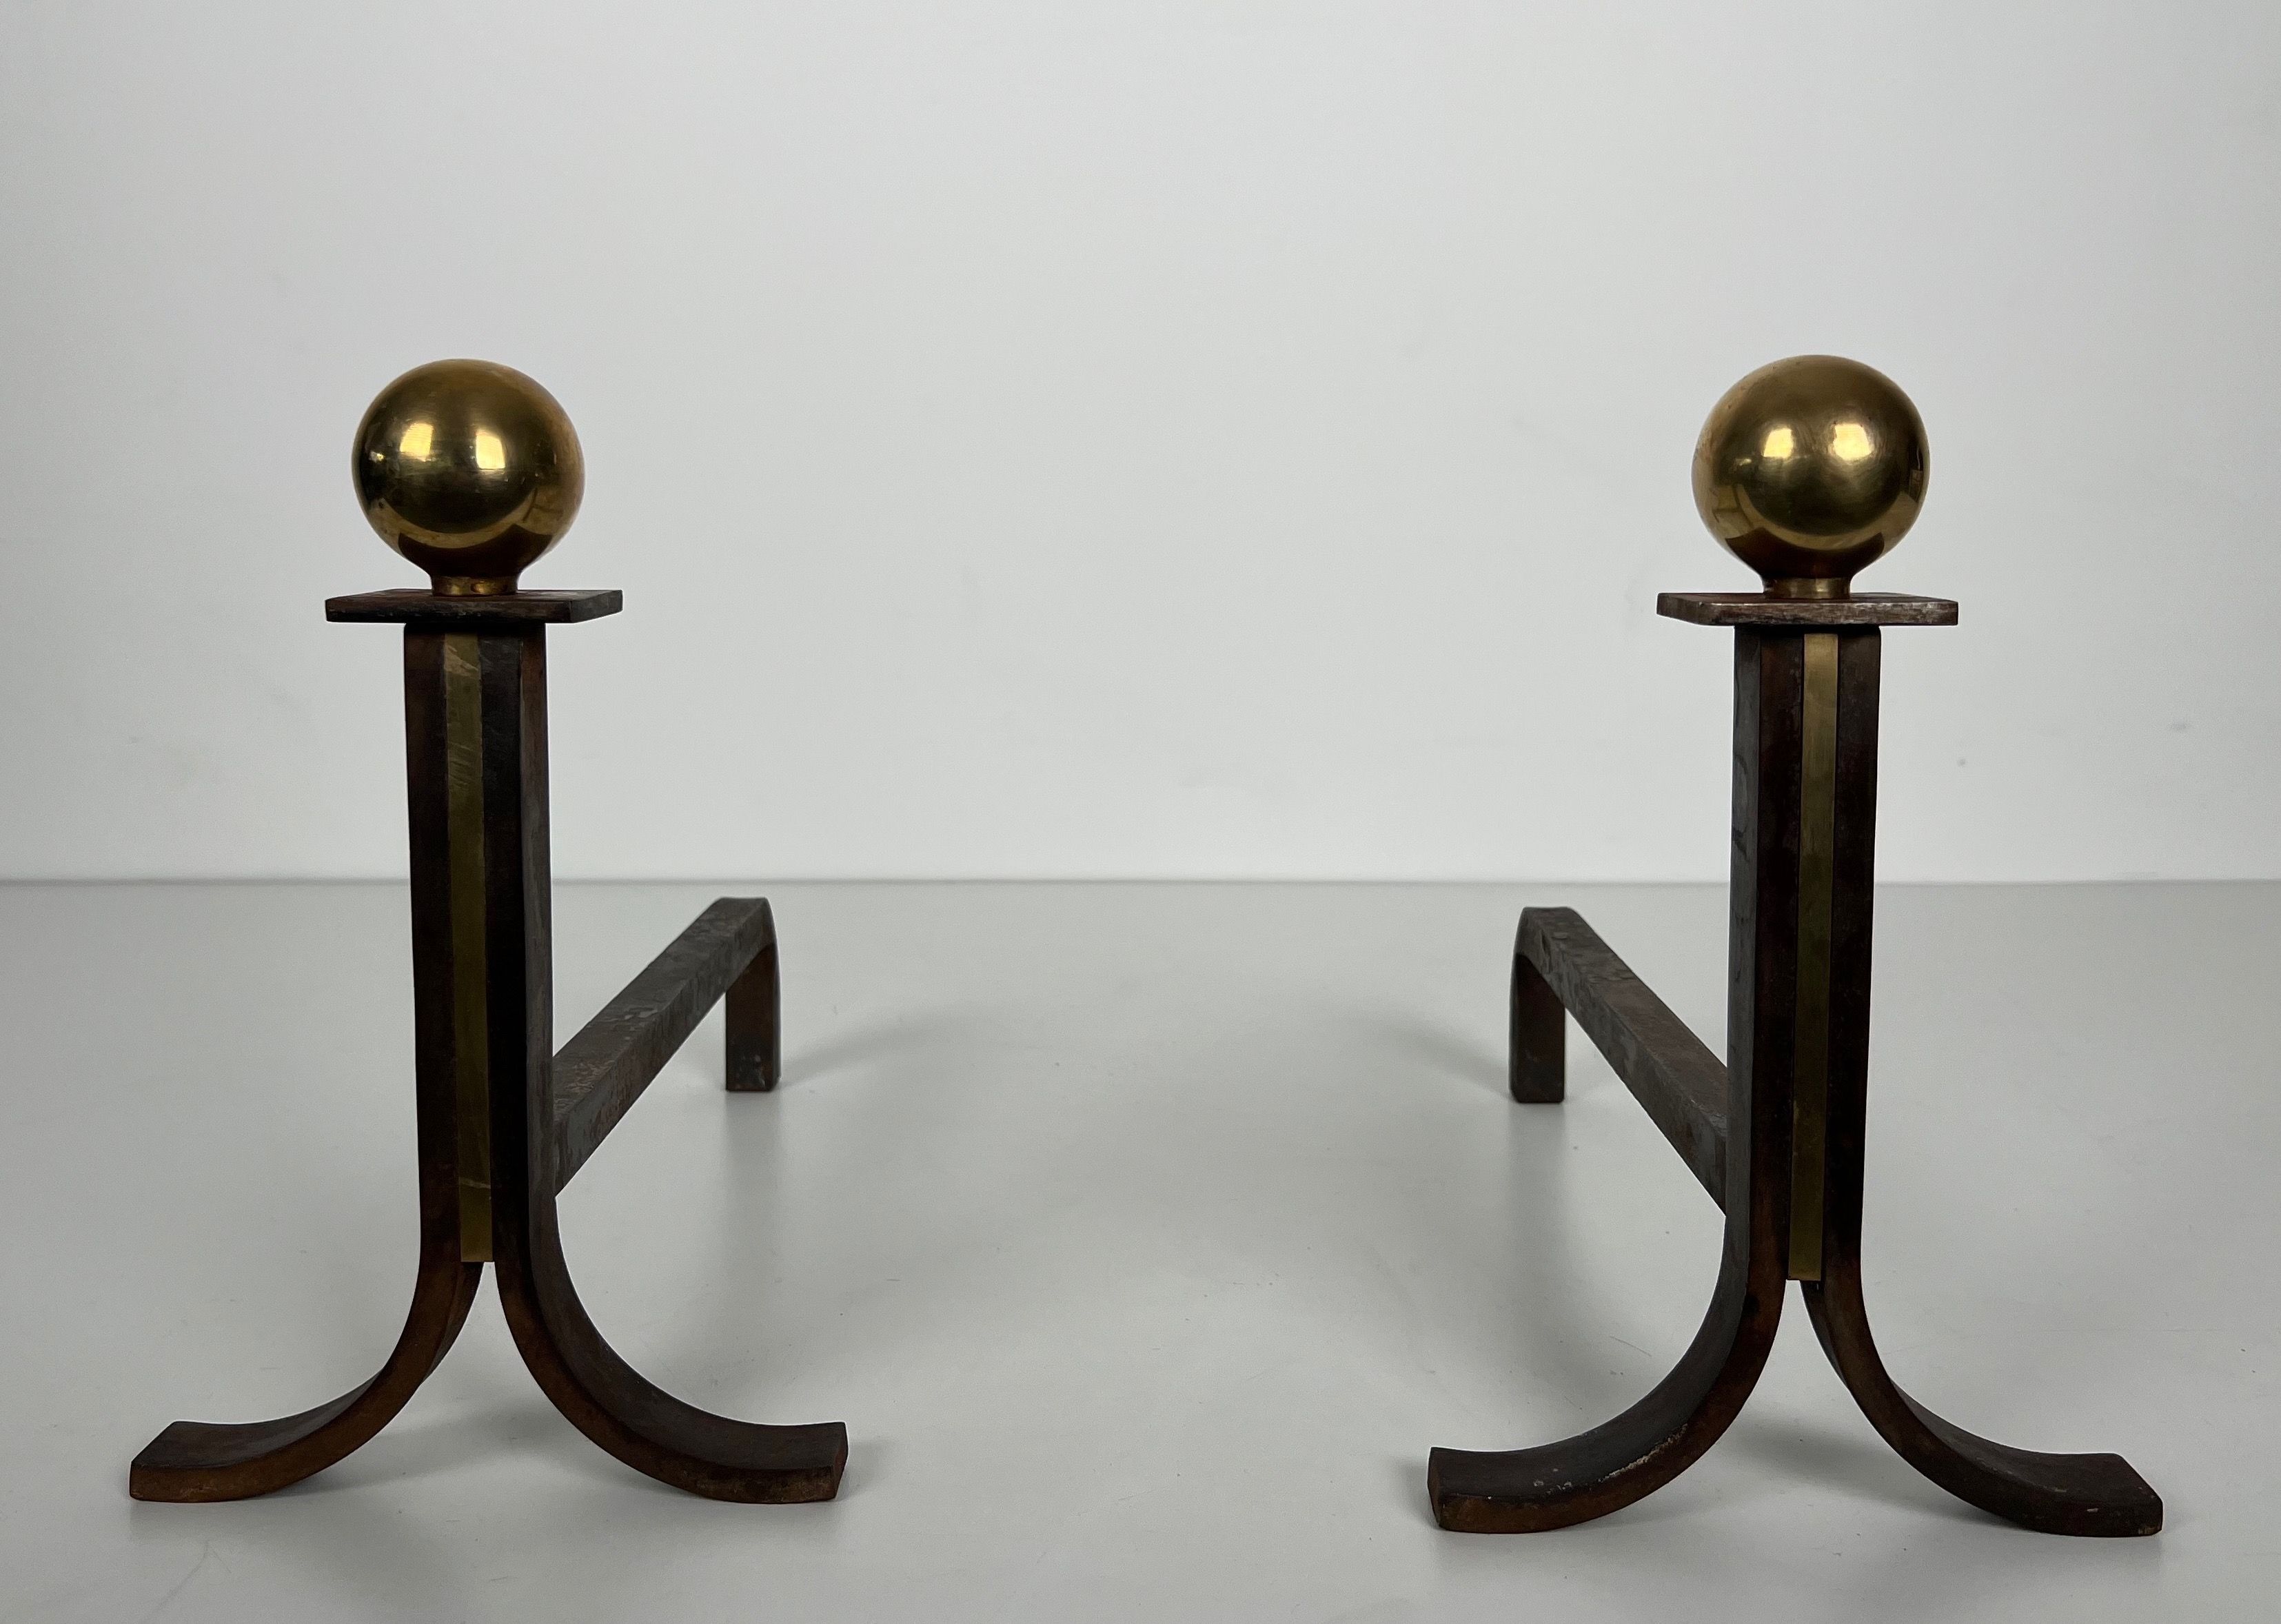 Pair of Modernist Steel, Brass and Wrought Iron Andirons in the Style of Jacques Adnet